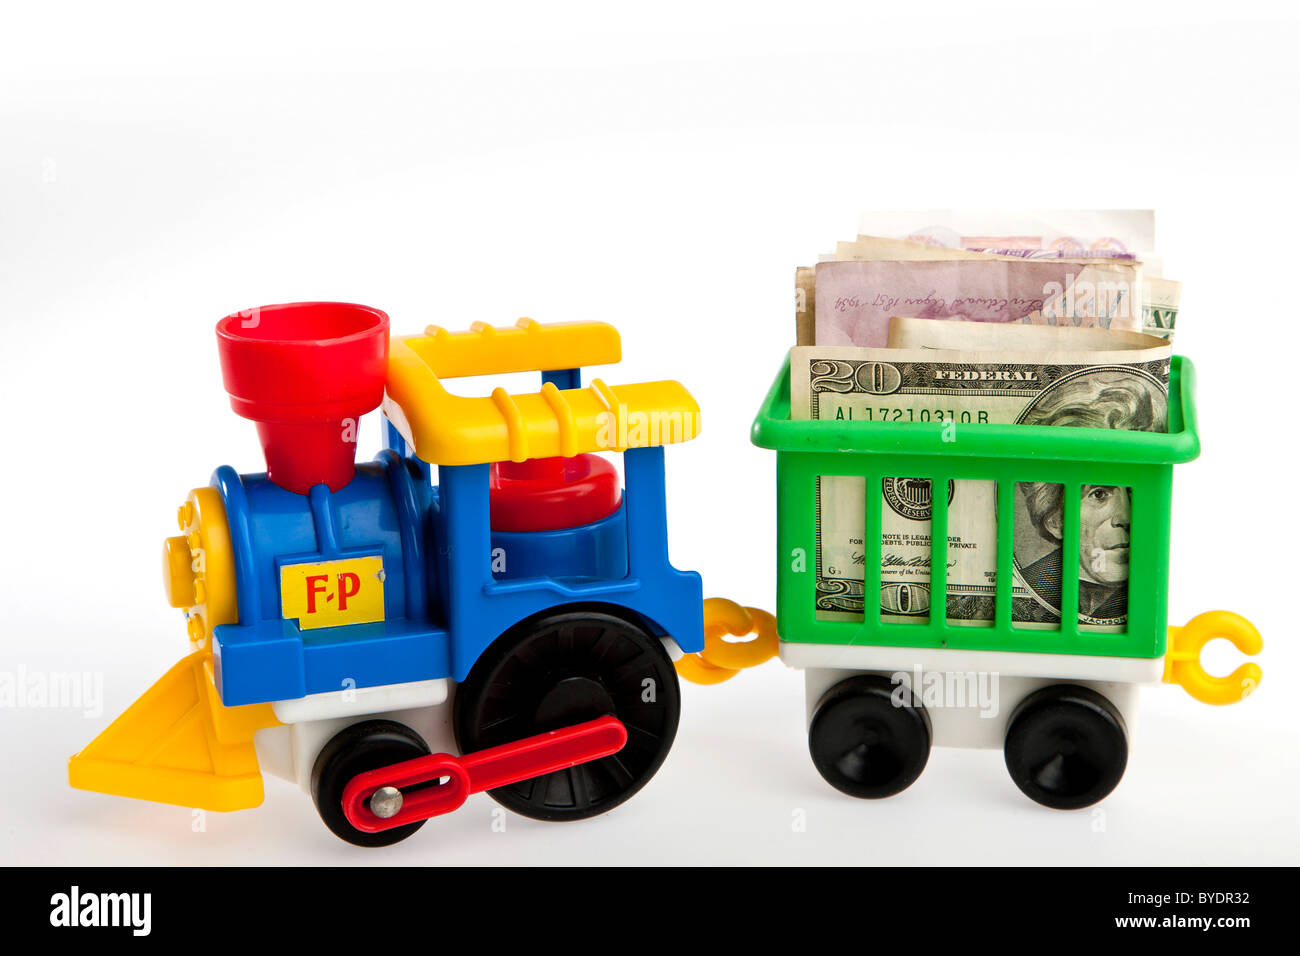 Toy train transporting bank notes Stock Photo